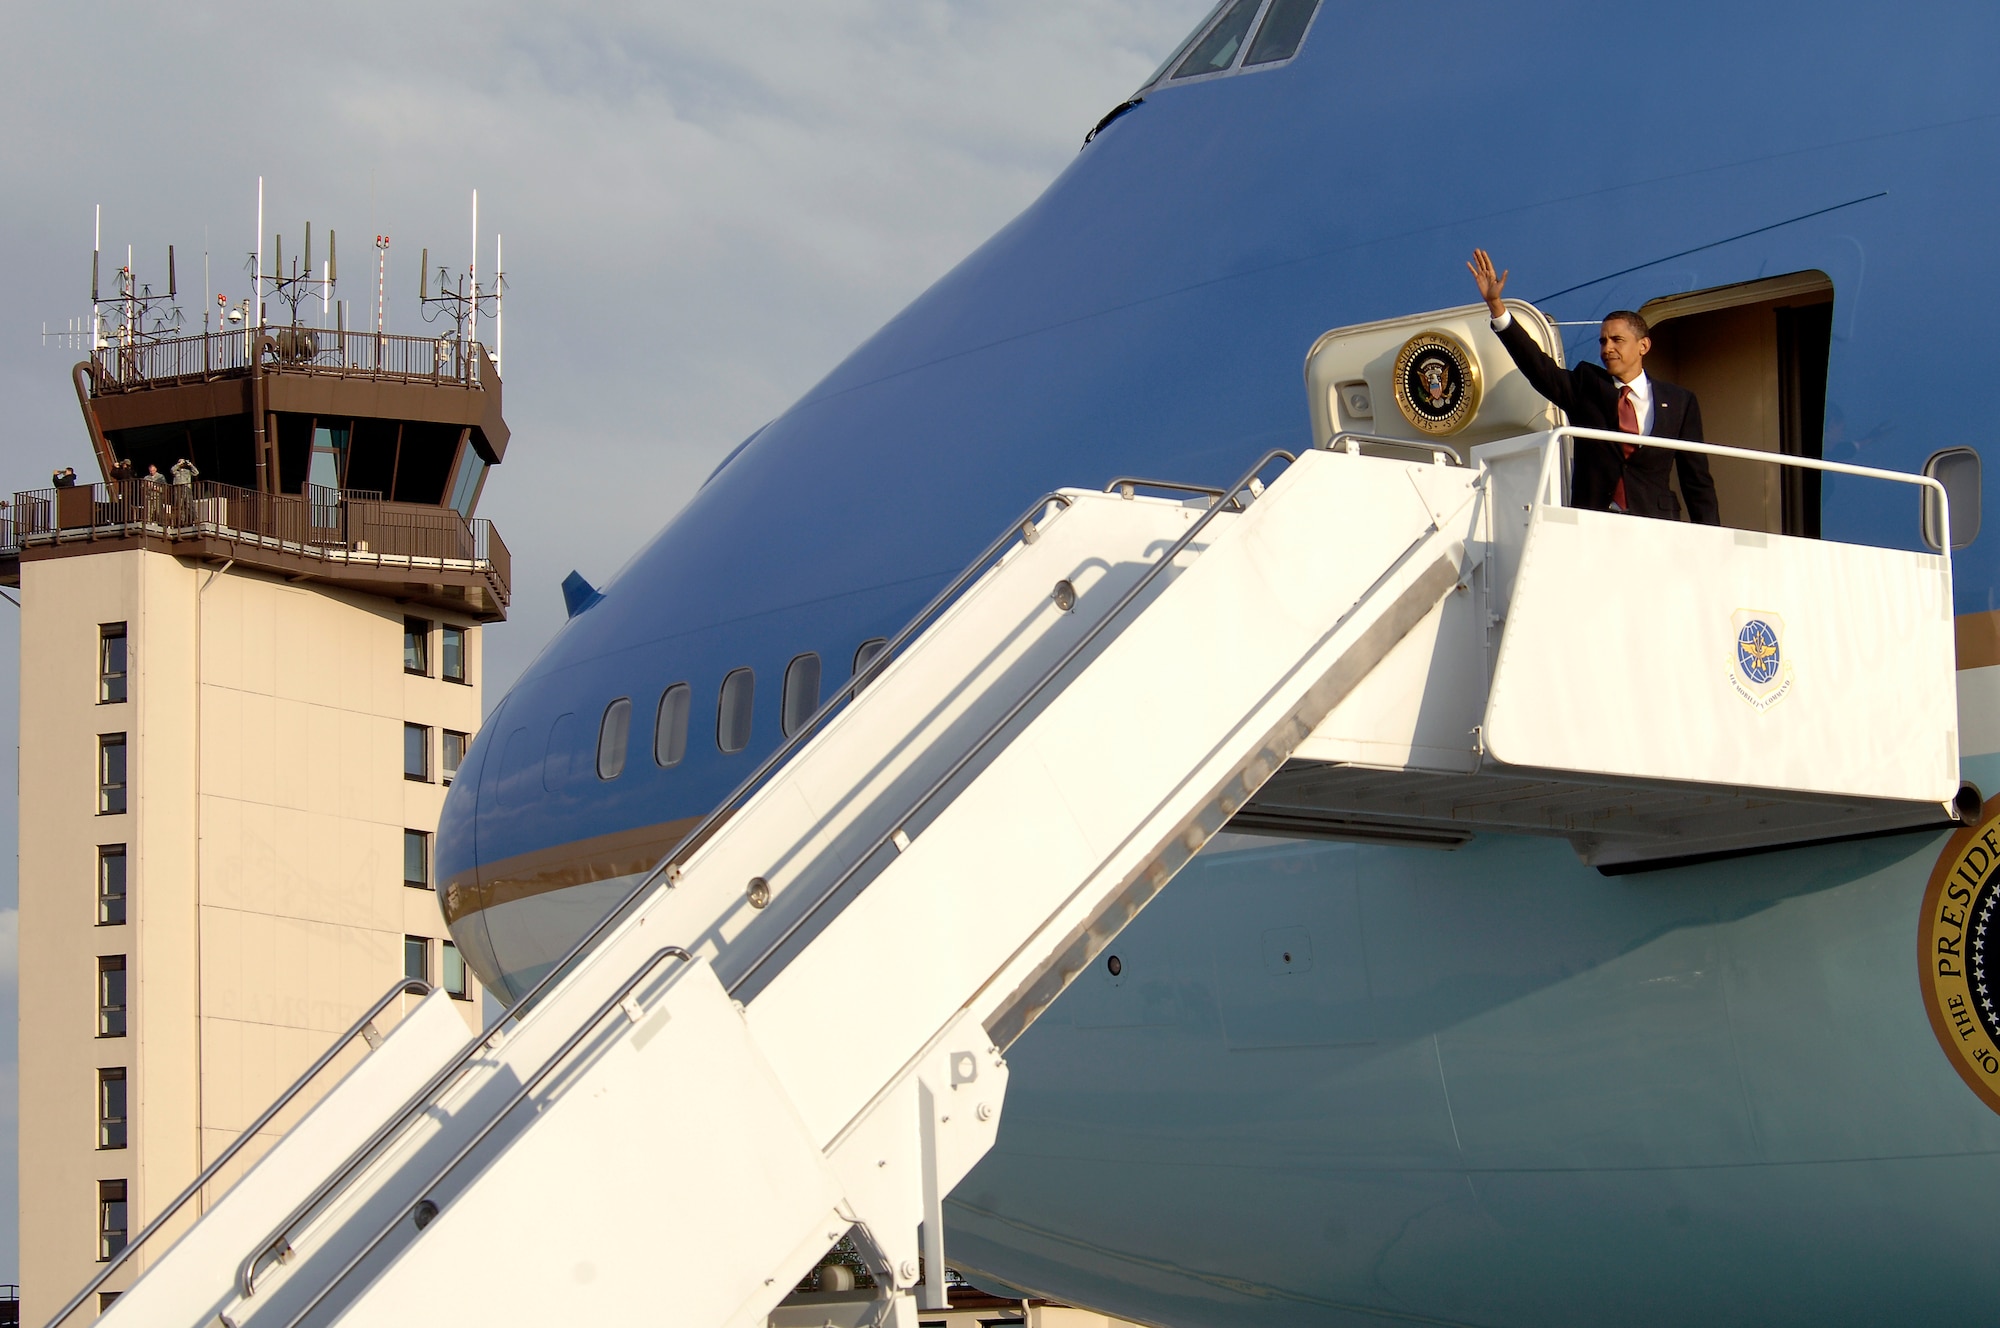 United States President Barack Obama, waves to the crowd as he enters Air Force One at Ramstein Air Base, Germany, June 5, 2009. President Obama arrived at Ramstein en route to Landstuhl Regional Medical Center, Germany, to visit wounded U.S. military members being treated there. (U.S. Air Force photo by Senior Airman Kenny Holston)